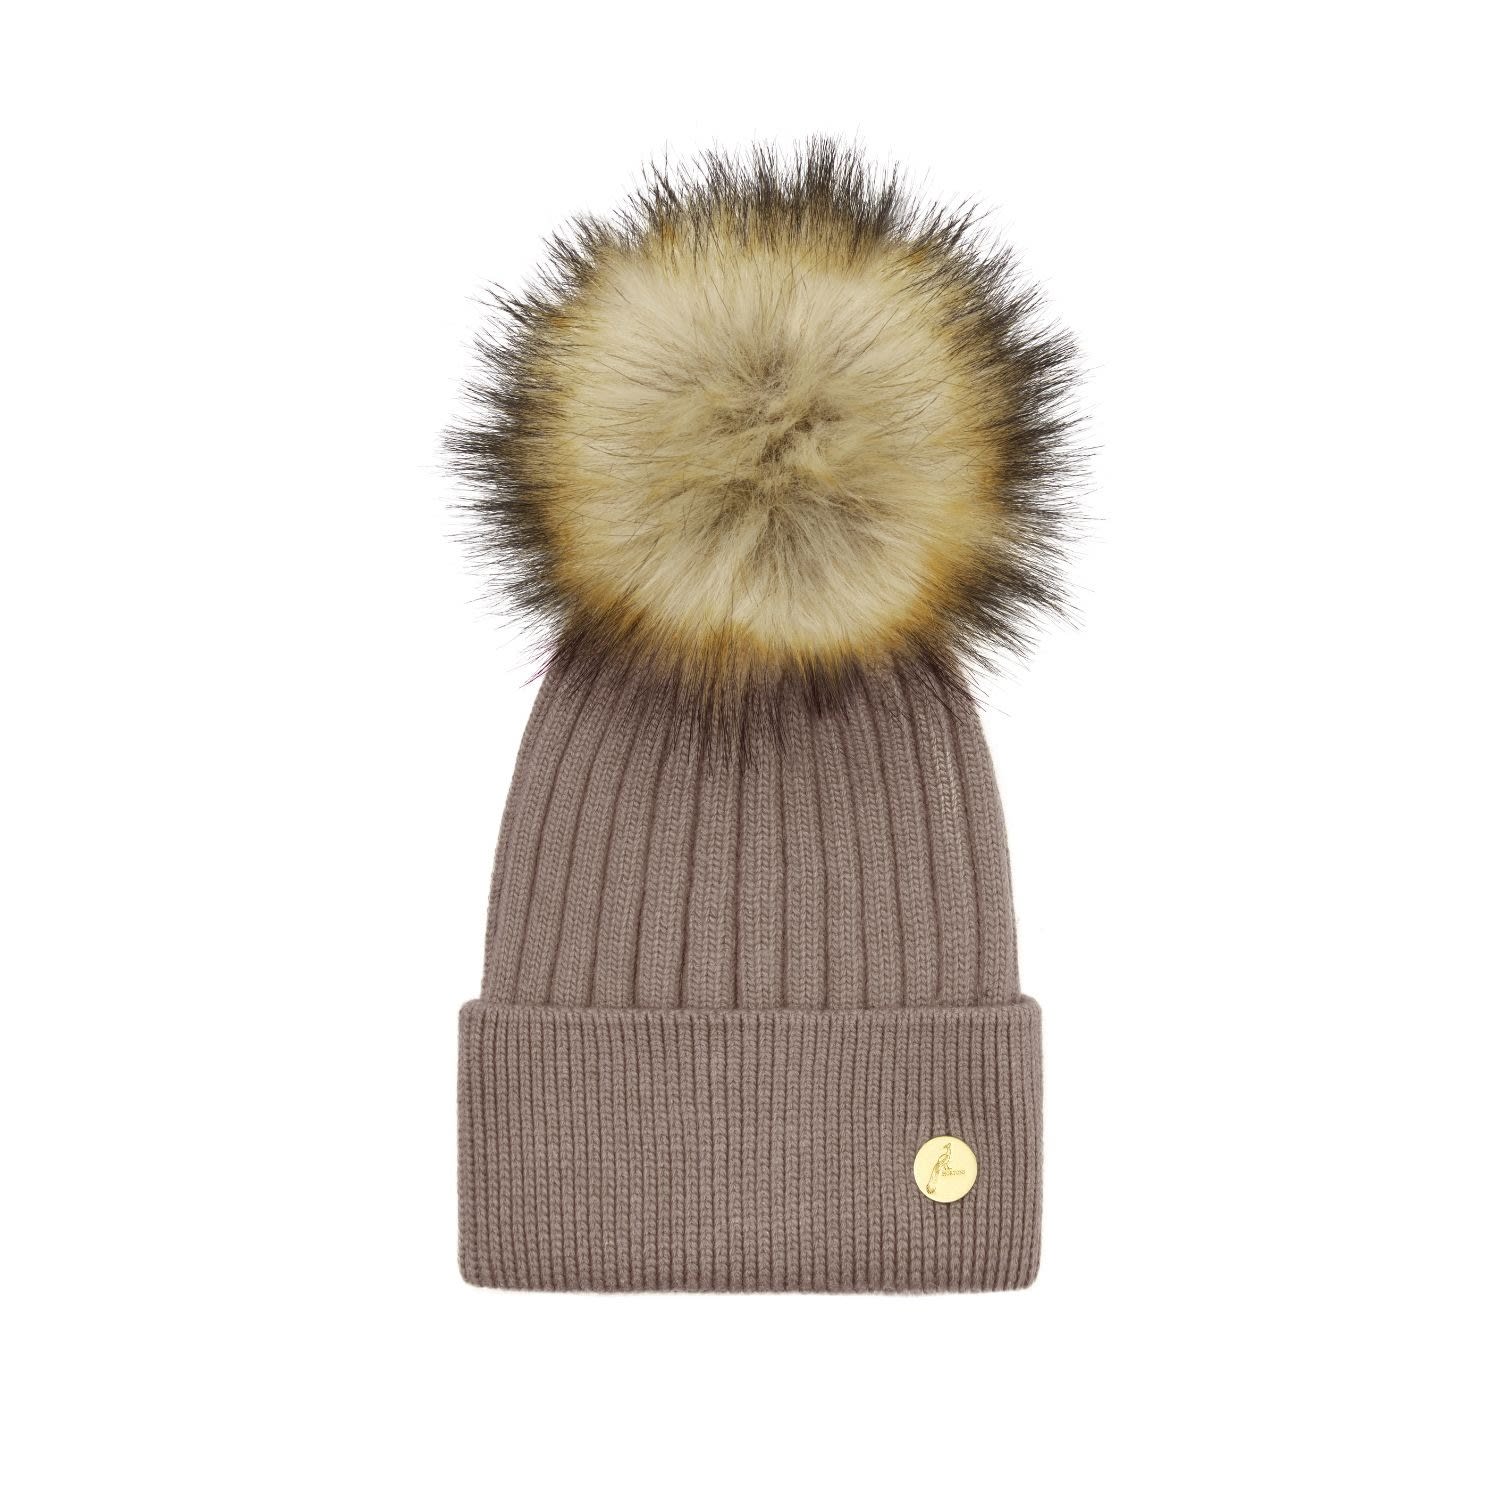 Hortons England Women's Neutrals Arundel Cashmere Pom Pom Hat - Fawn In Yellow